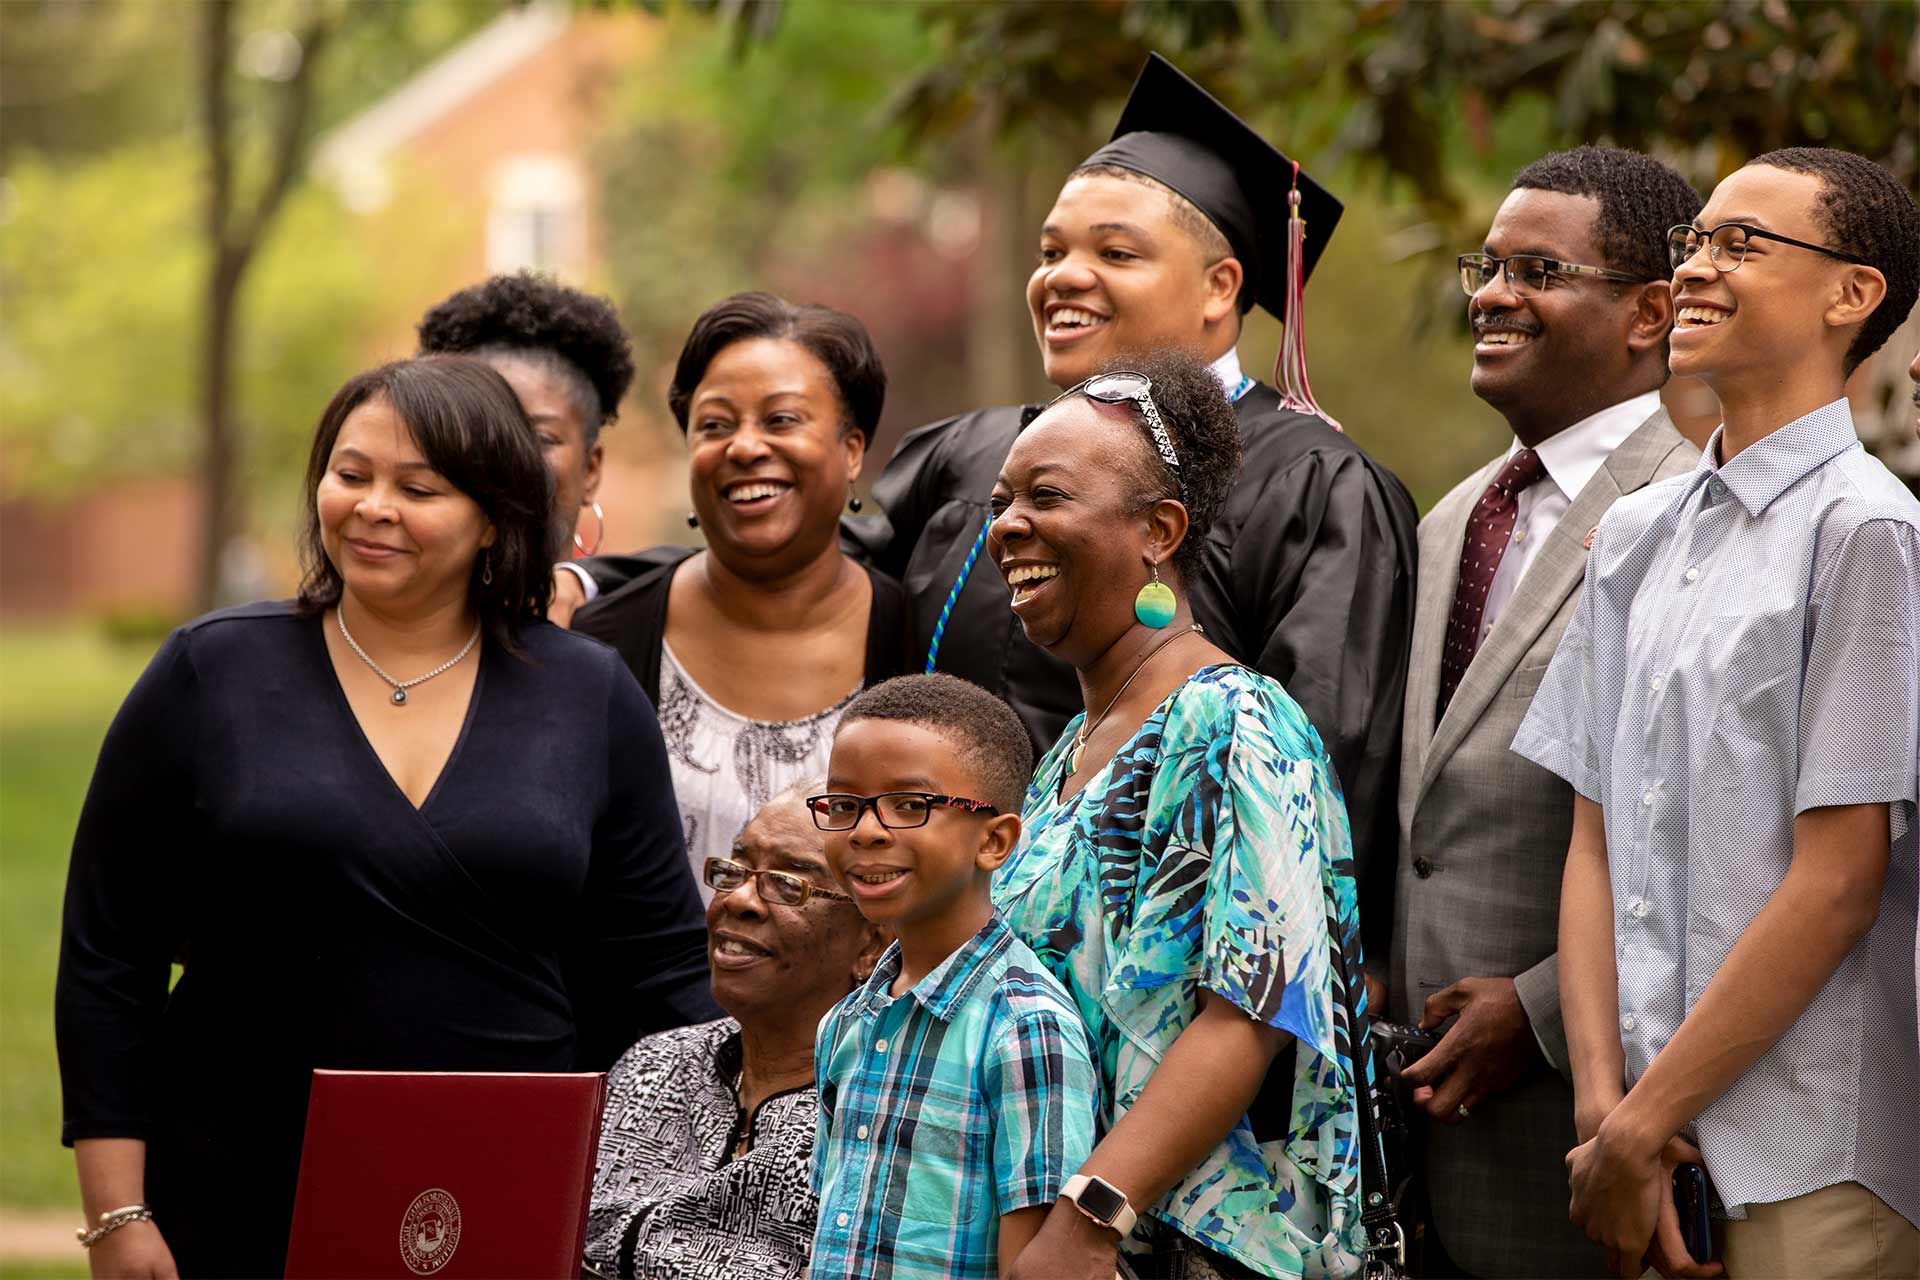 A family poses for a photo with their graduate after Commencement.